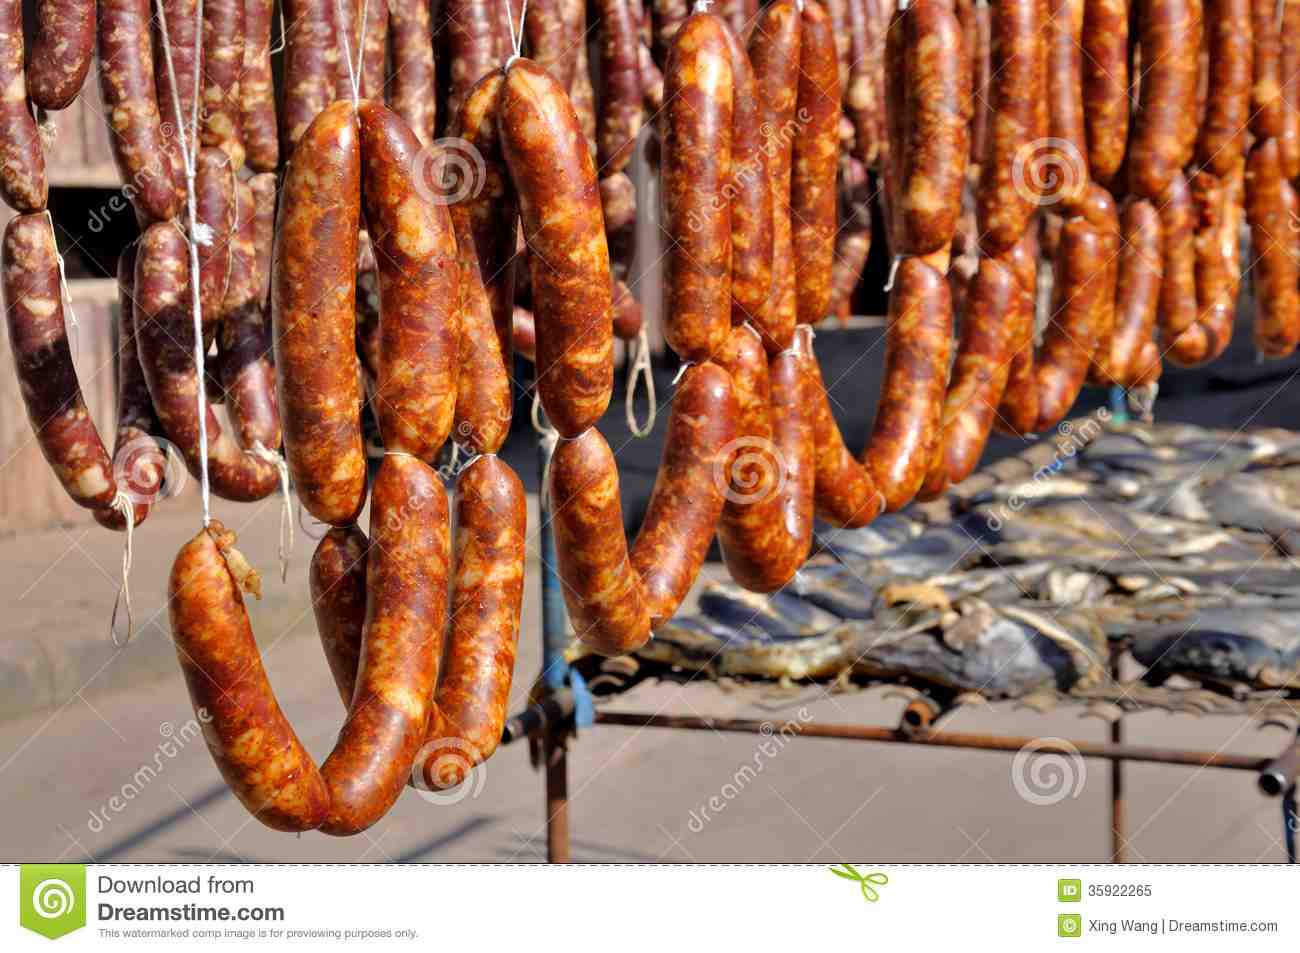 Can dogs eat Chinese sausage?